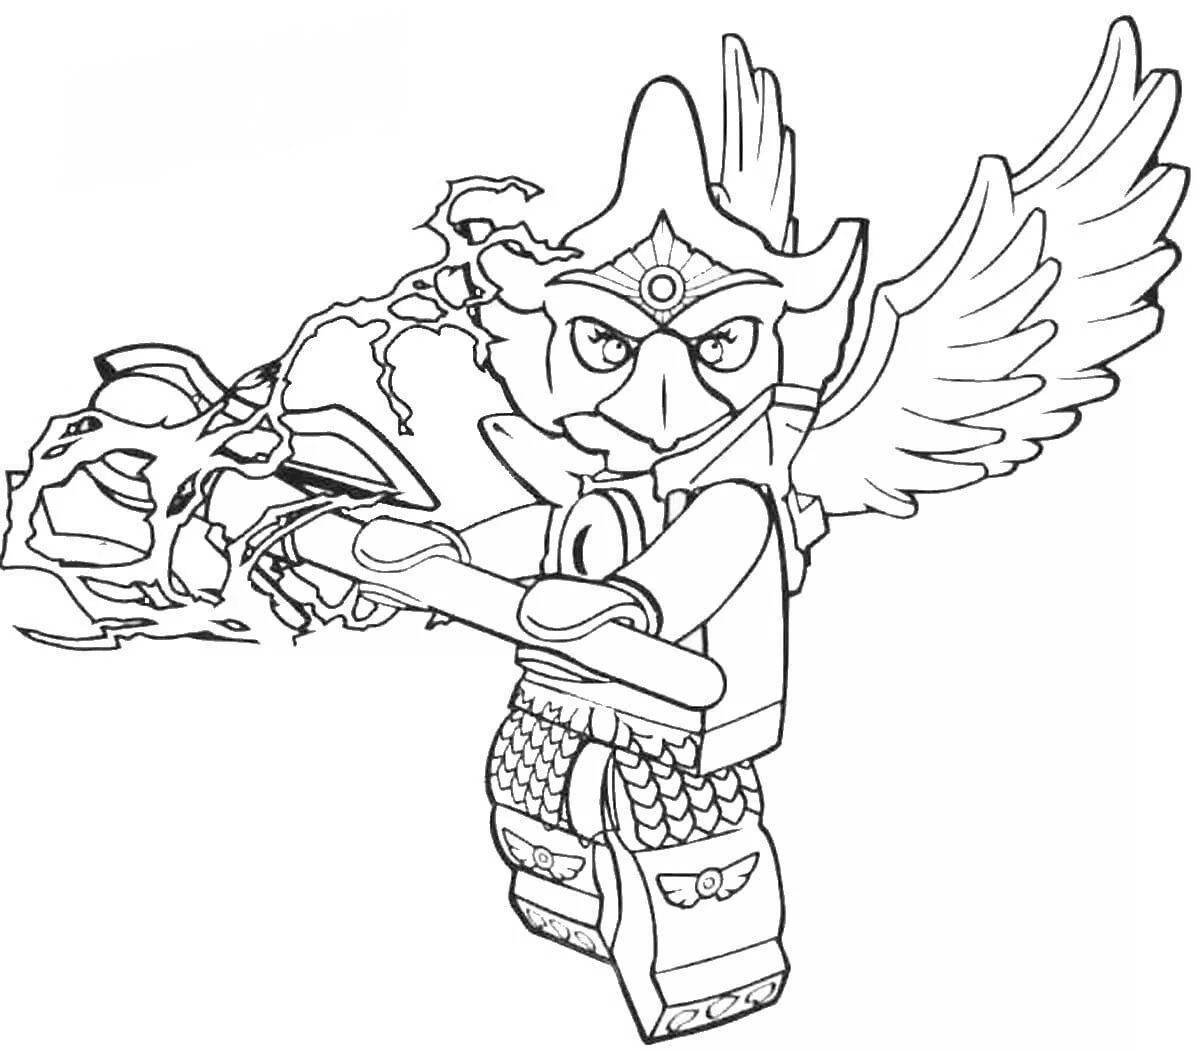 Coloring page hidden site grand lego